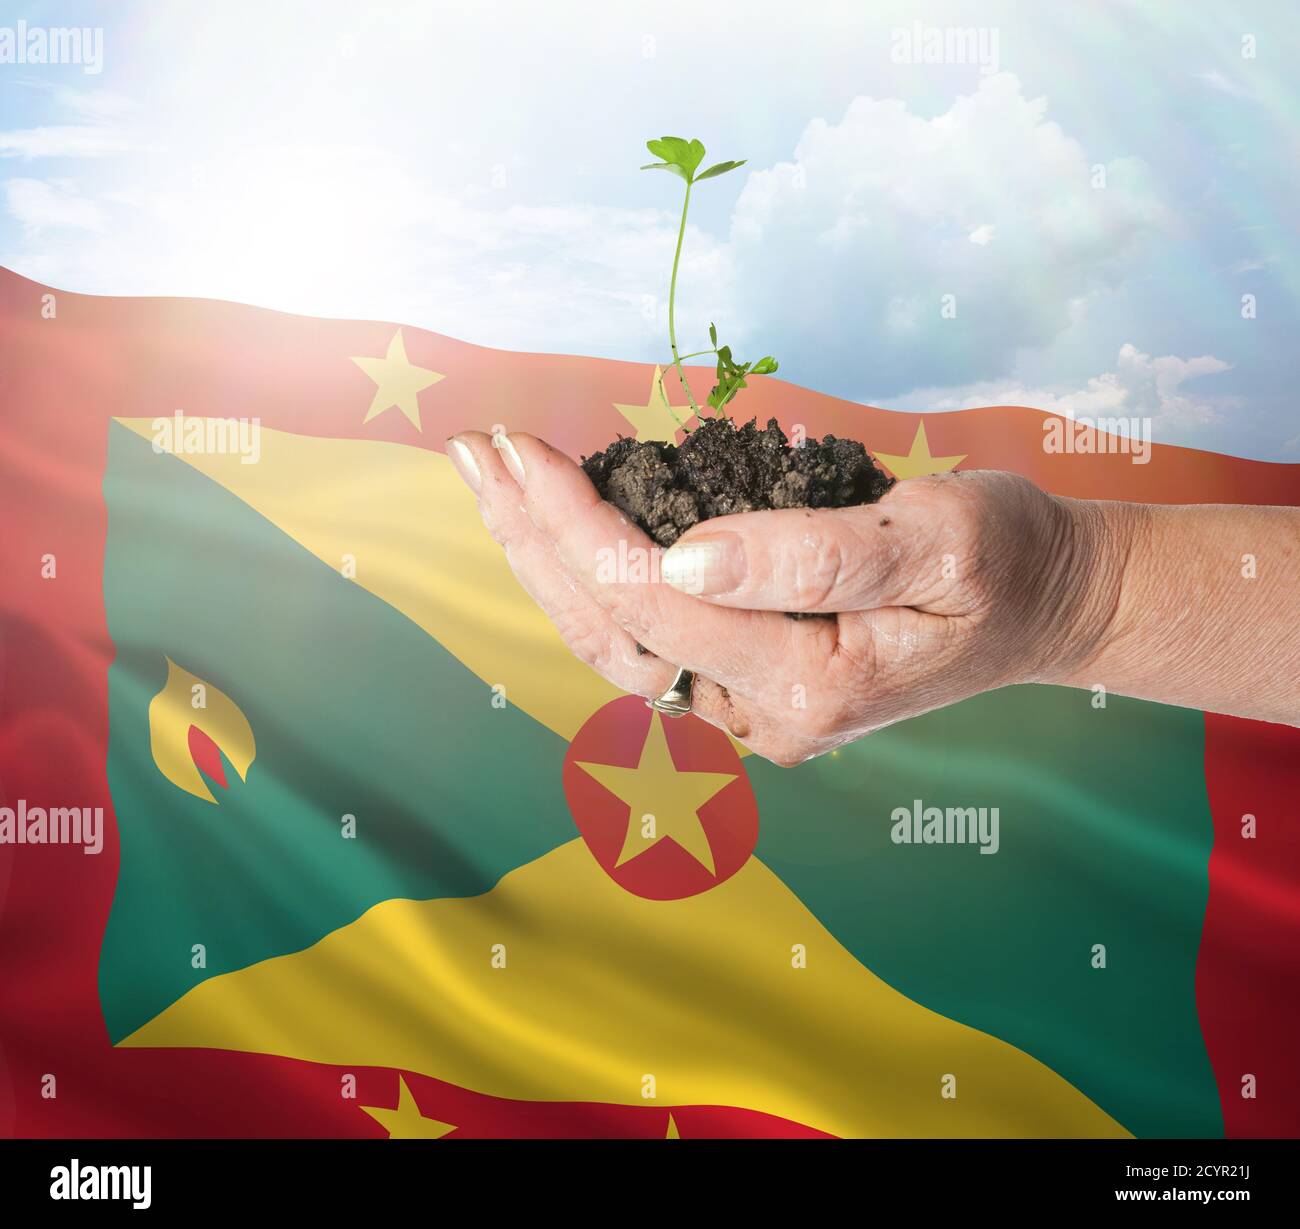 Grenada growth and new beginning. Green renewable energy and ecology concept. Hand holding young plant. Stock Photo